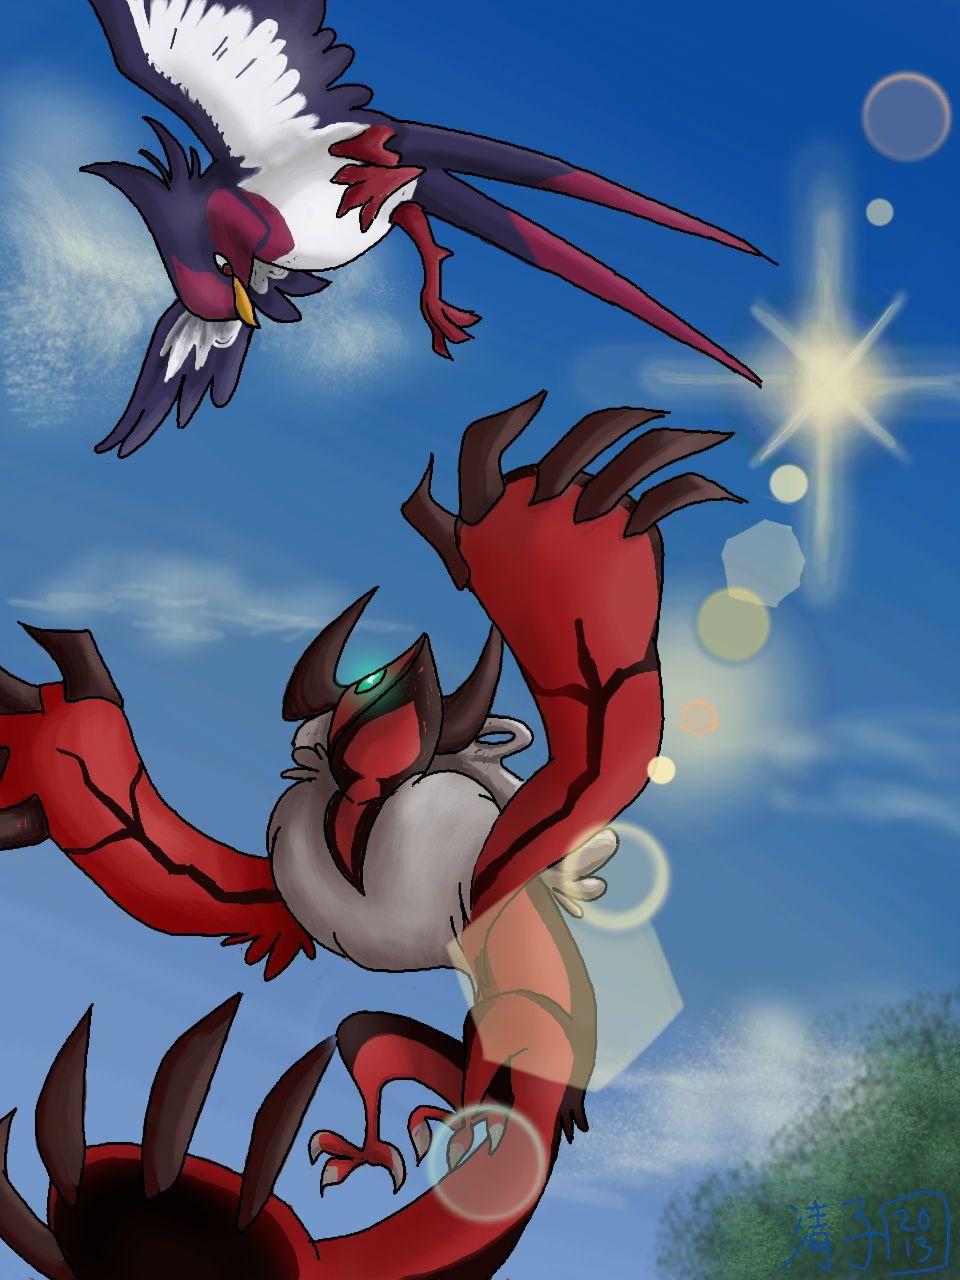 Yveltal and Swellow